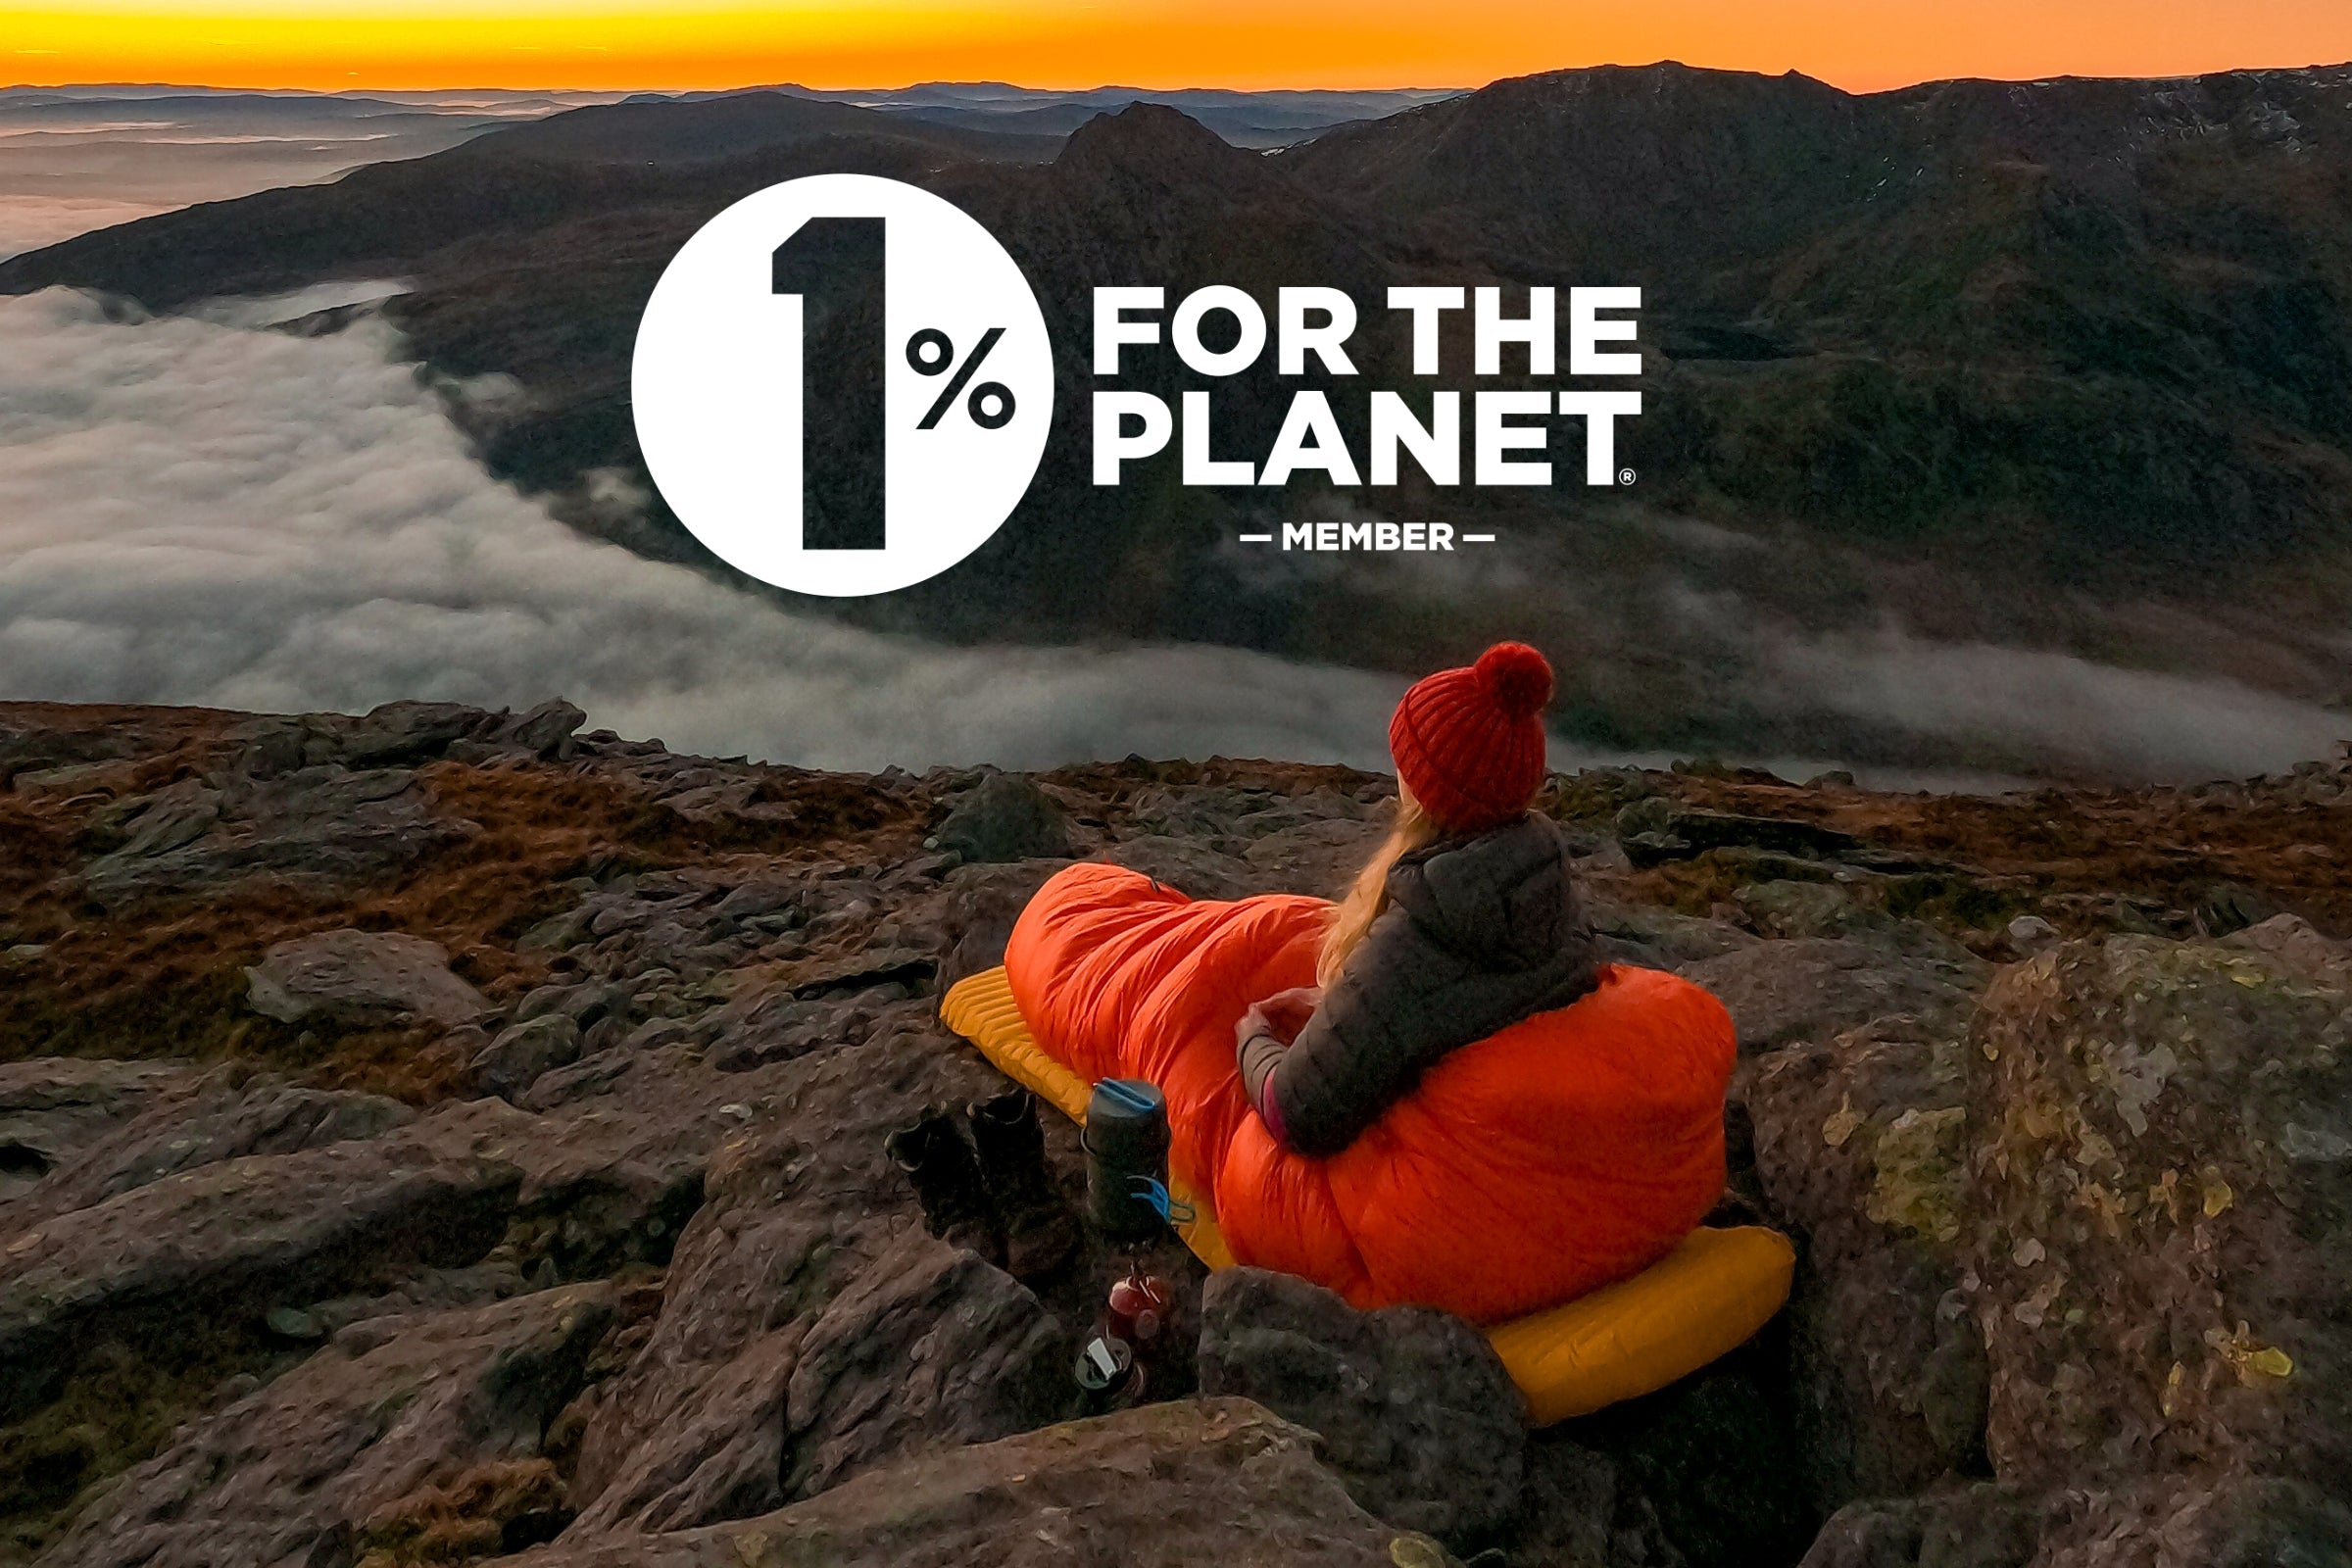 Extending our commitment to 1% for the Planet